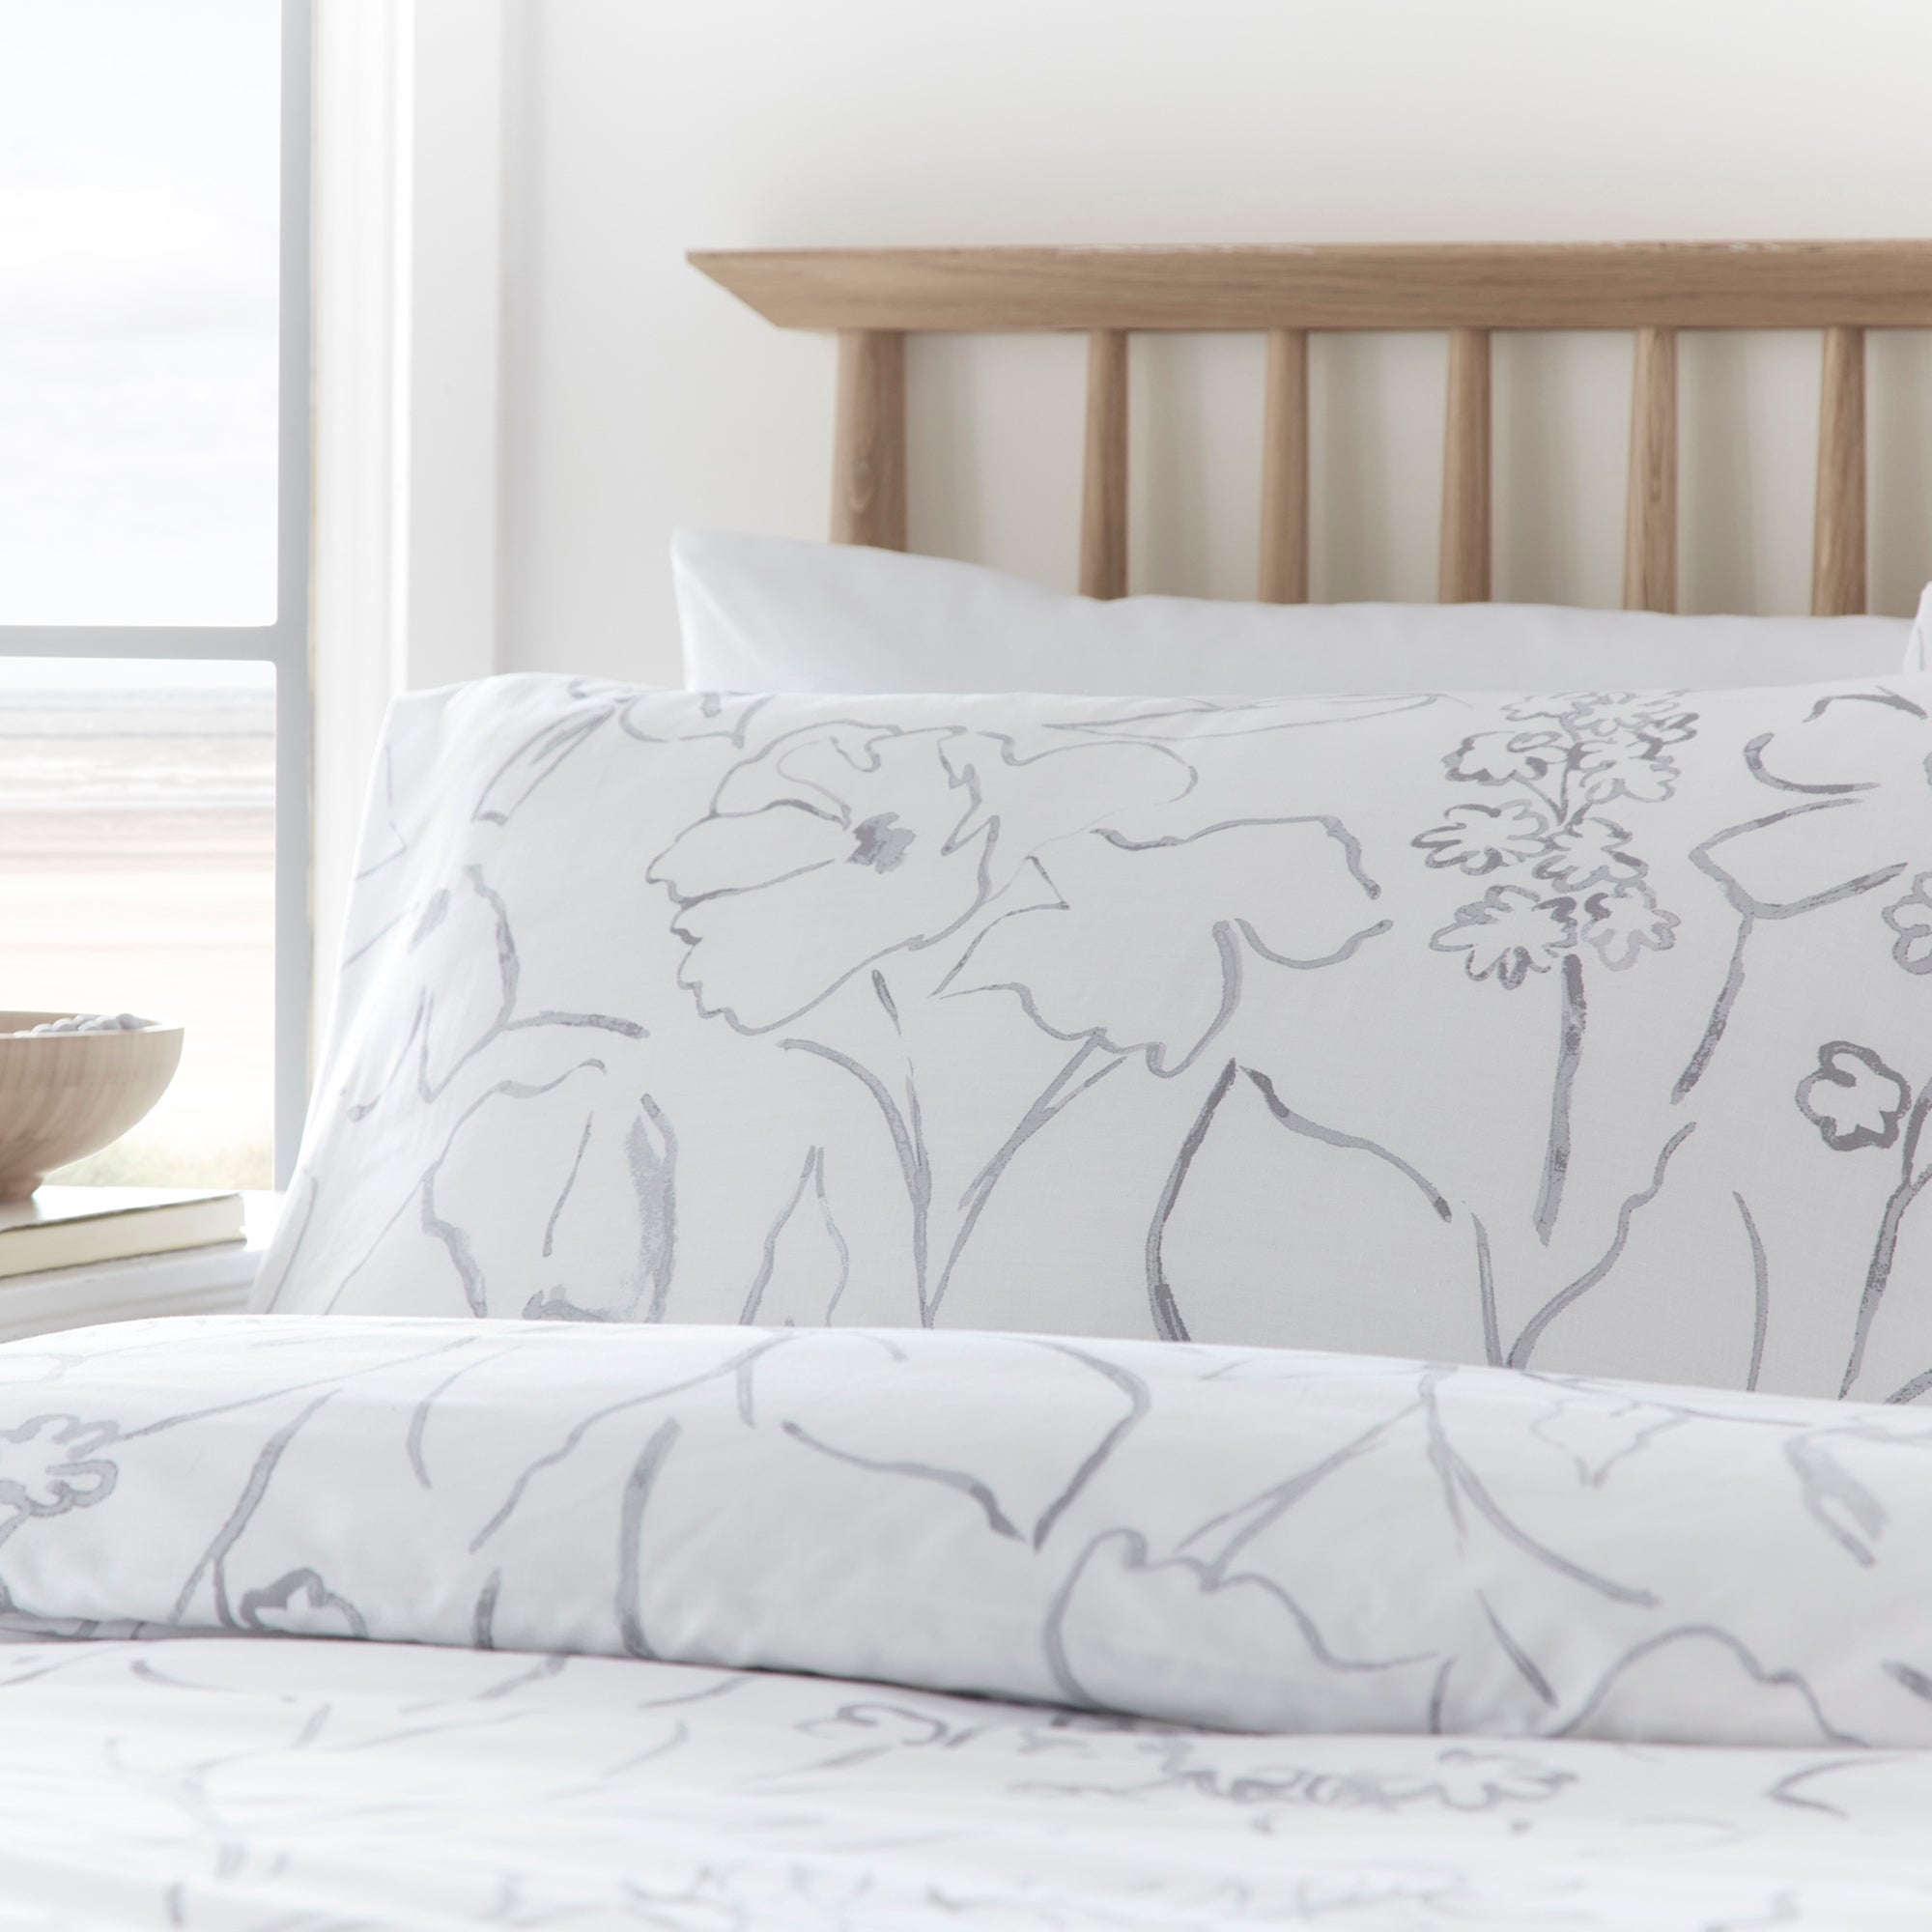 Joanna - Eco-Friendly Duvet Cover Set in Silver by Drift Home